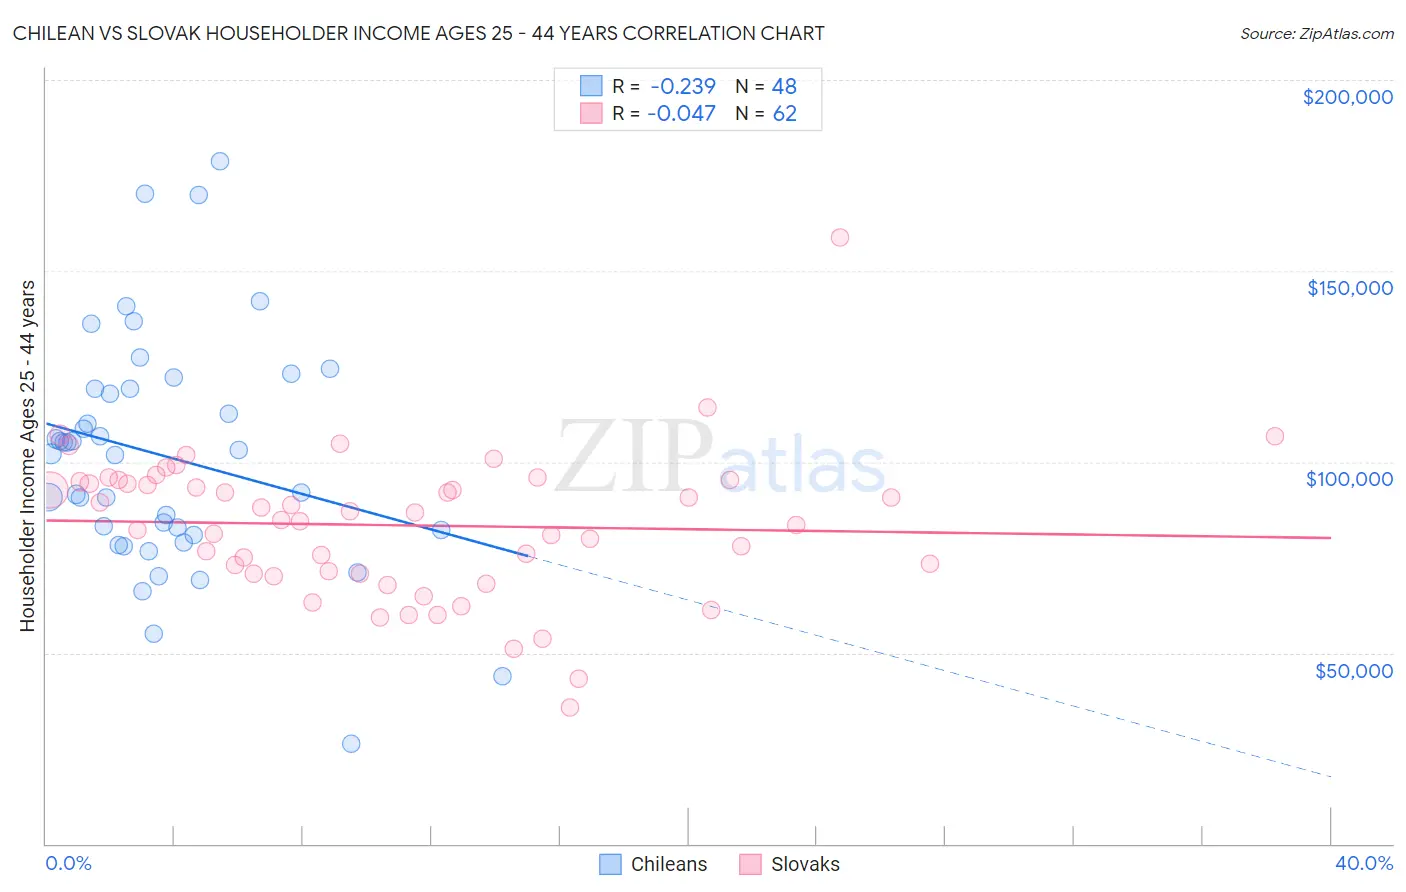 Chilean vs Slovak Householder Income Ages 25 - 44 years